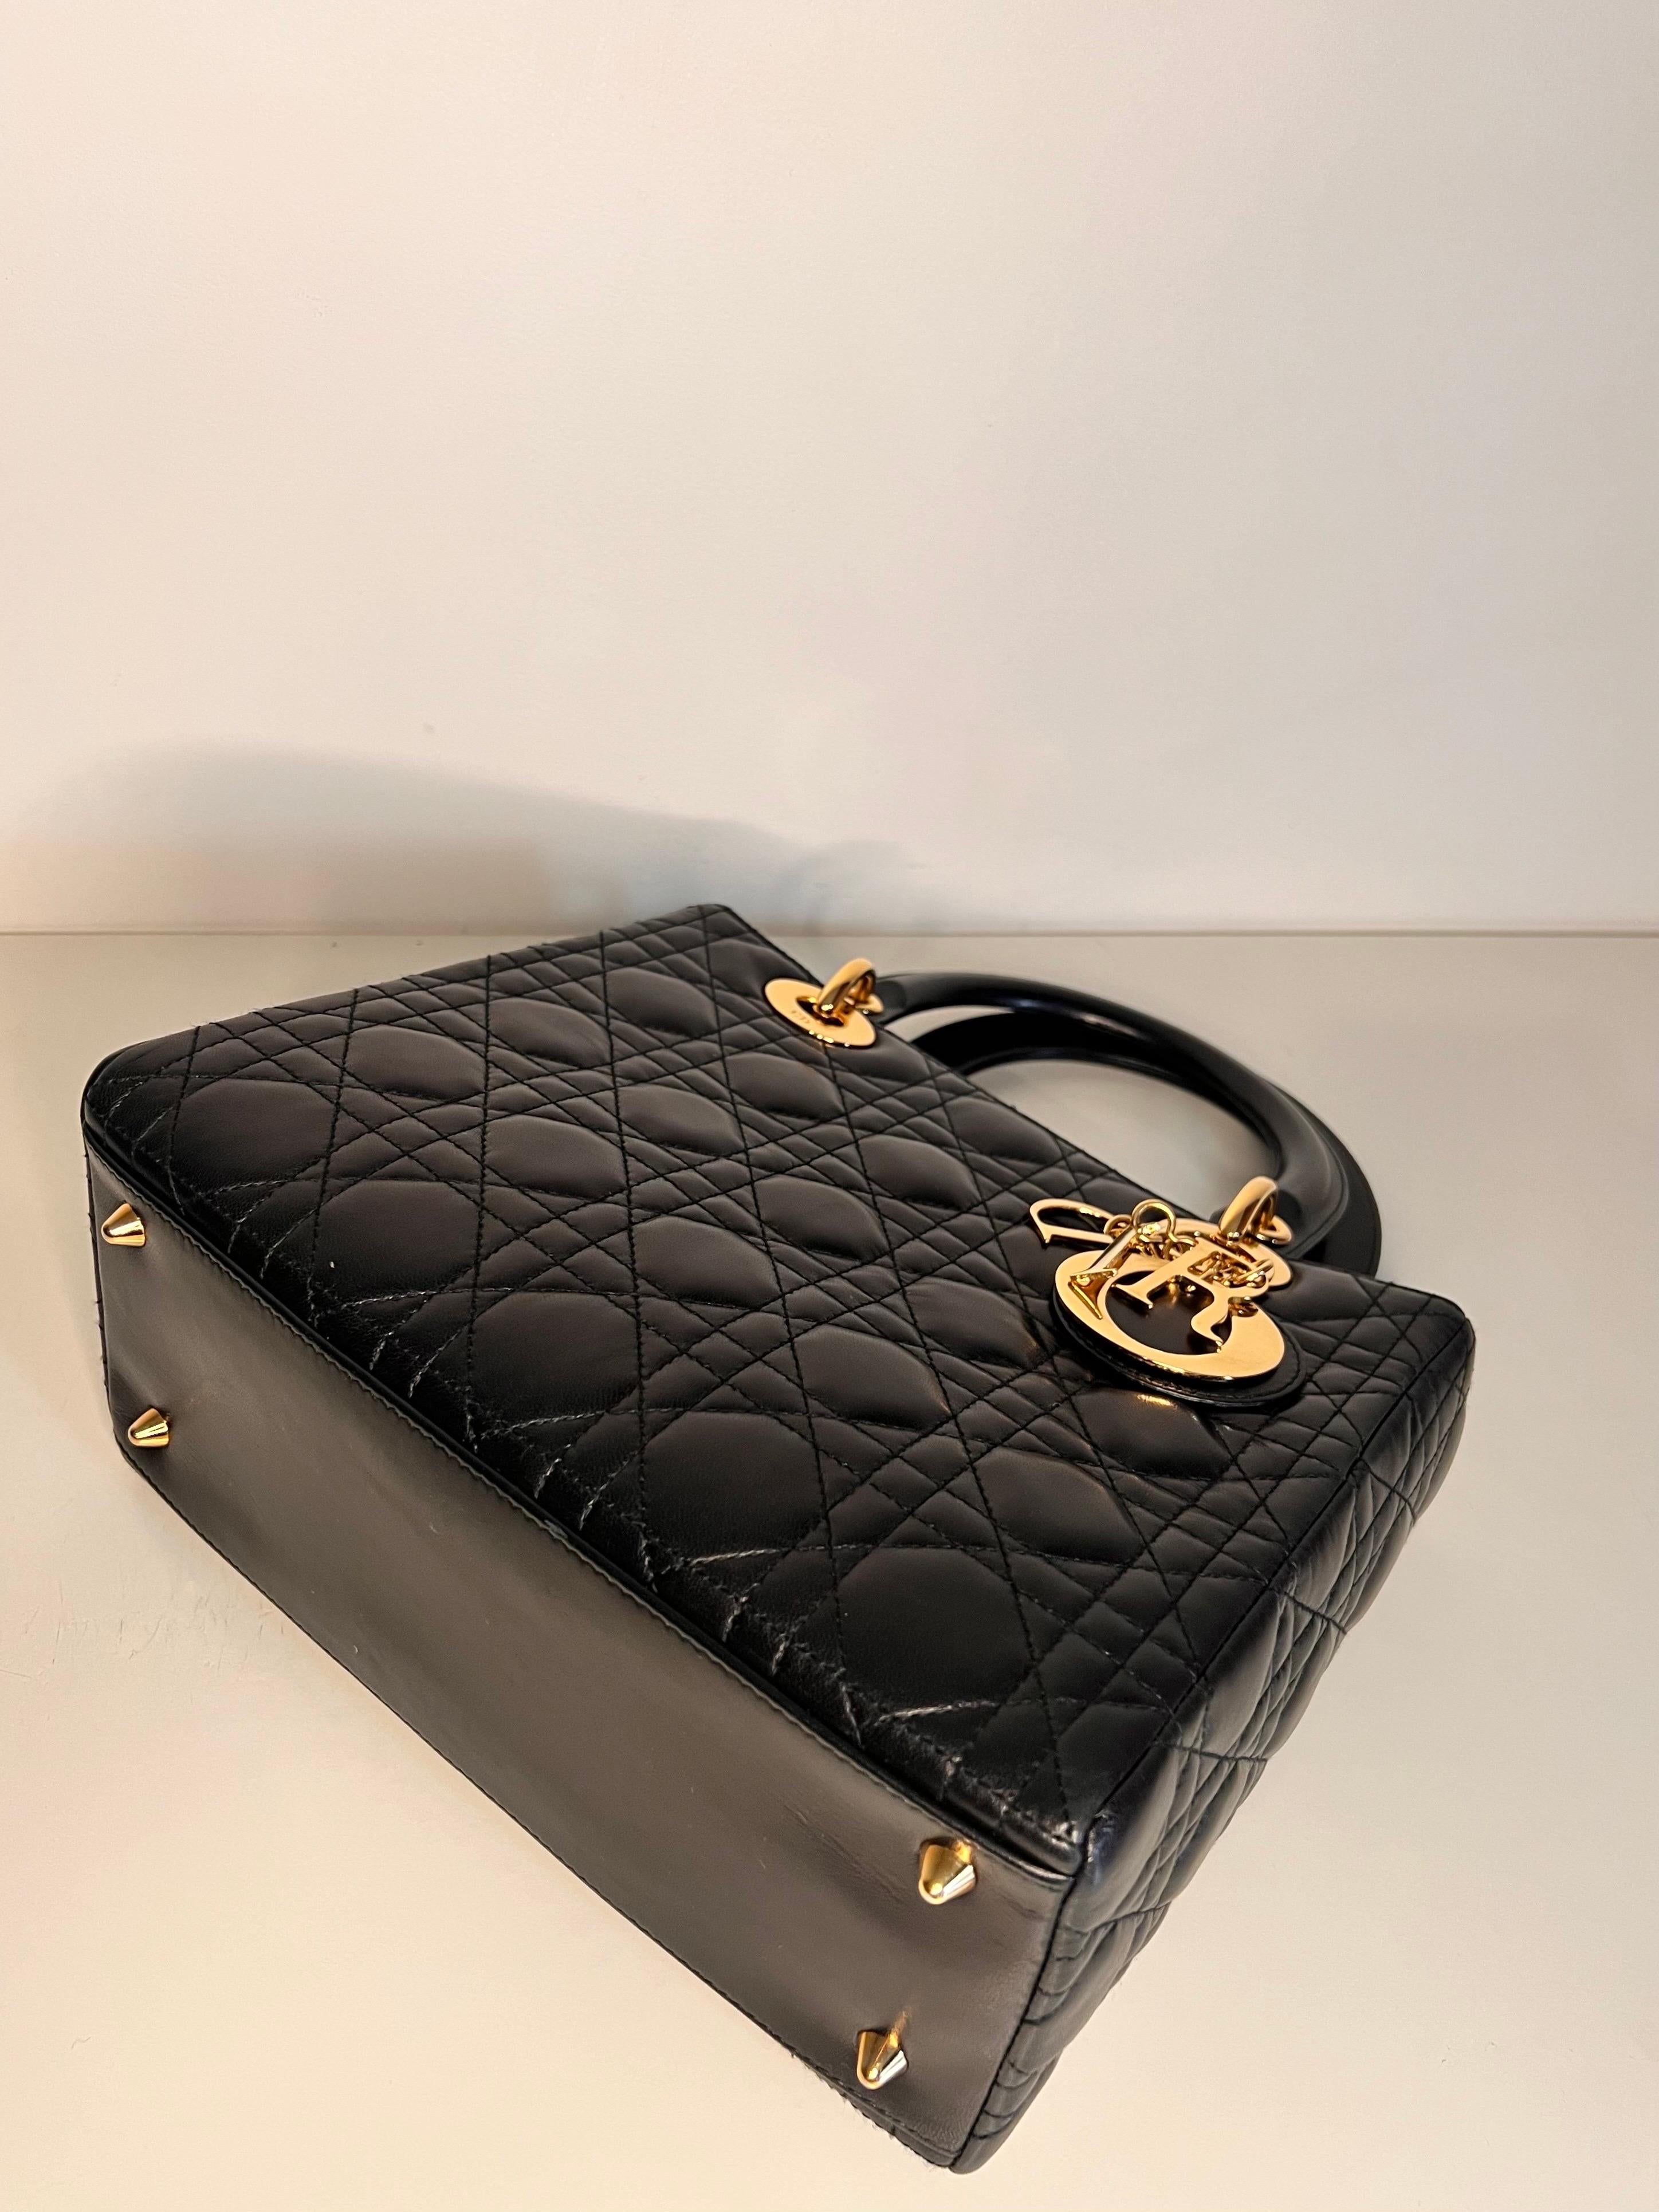 Lady DIOR quilted handbag with gold hardware, famously worn by Princess Diana  9